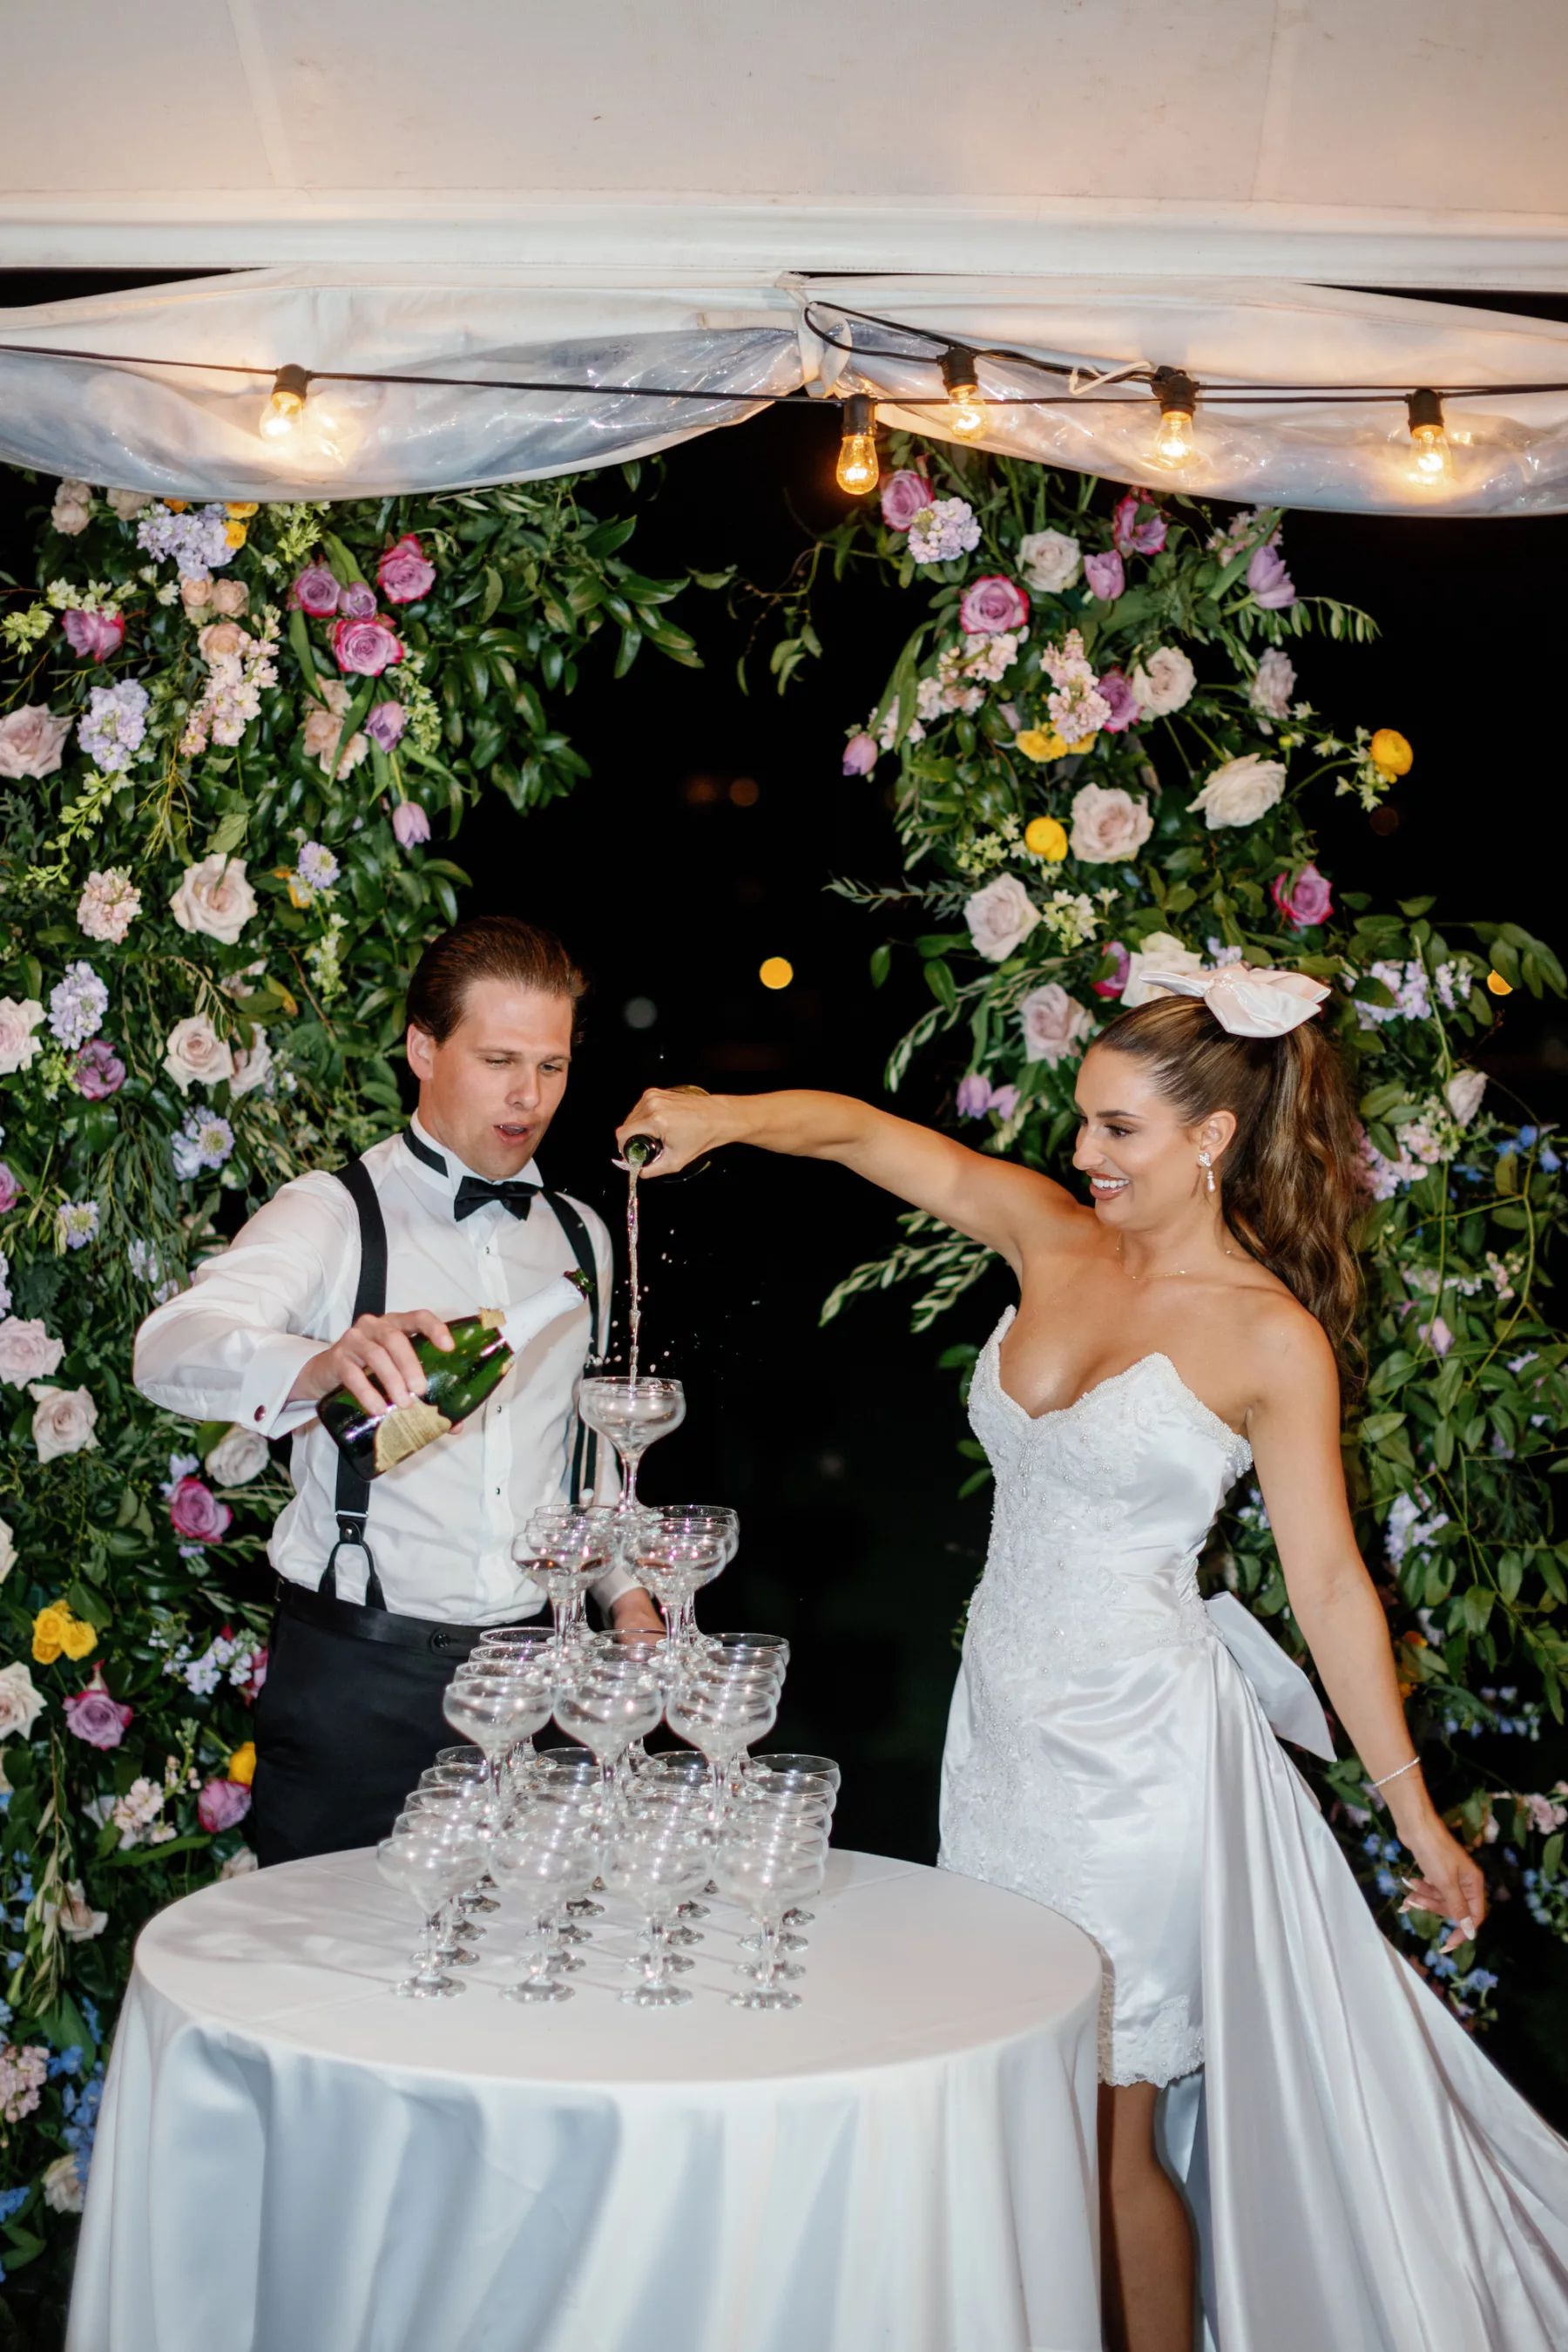 Bride and Groom's Champagne Tower for Elegant Old Florida Wedding Reception Ideas